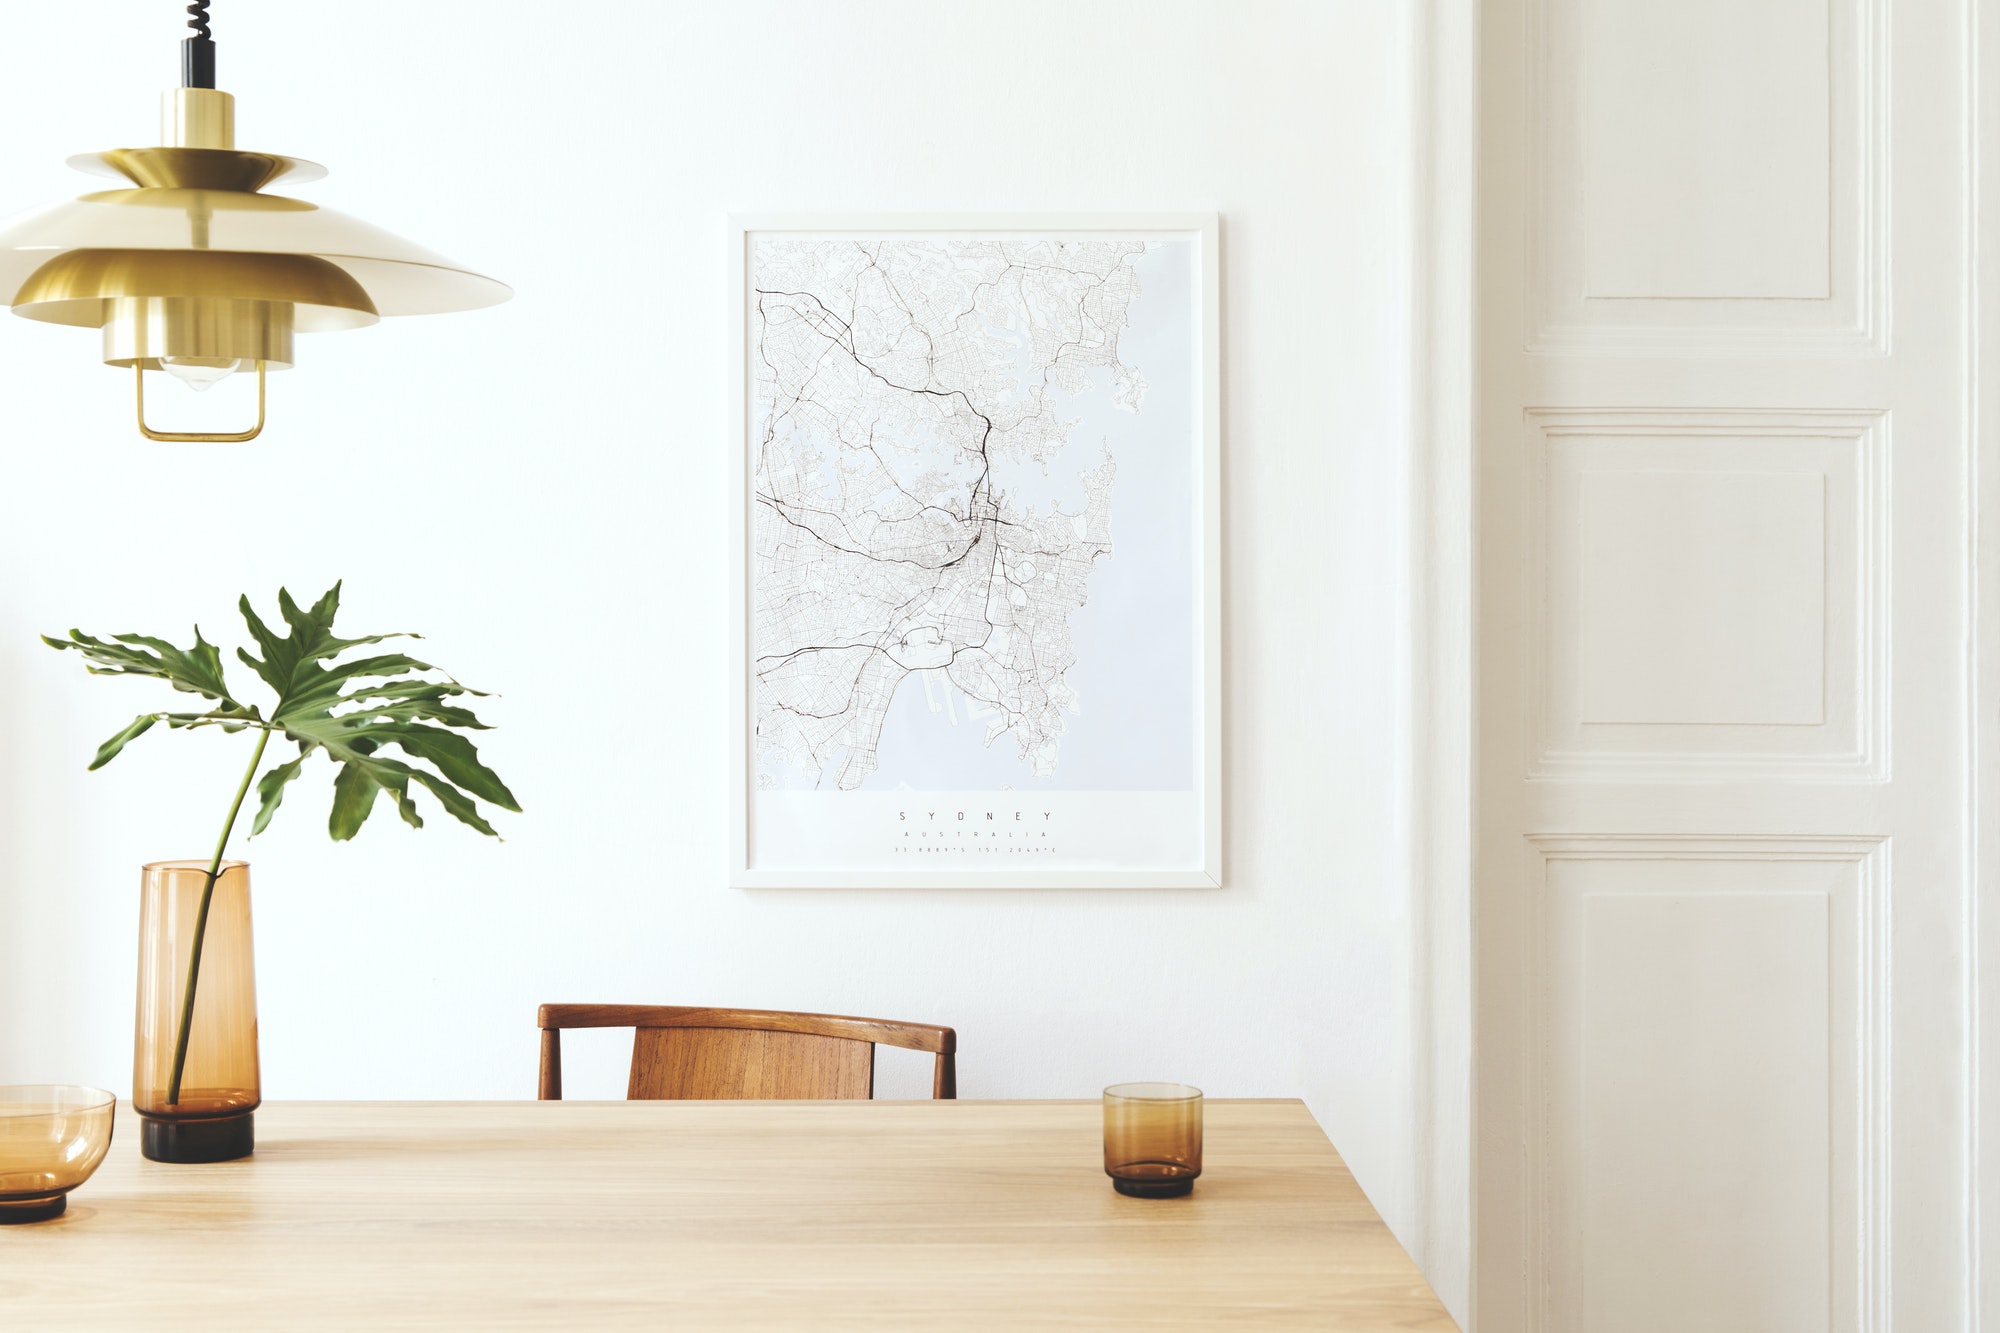 Stylish and eclectic dining room interior with mock up poster map.